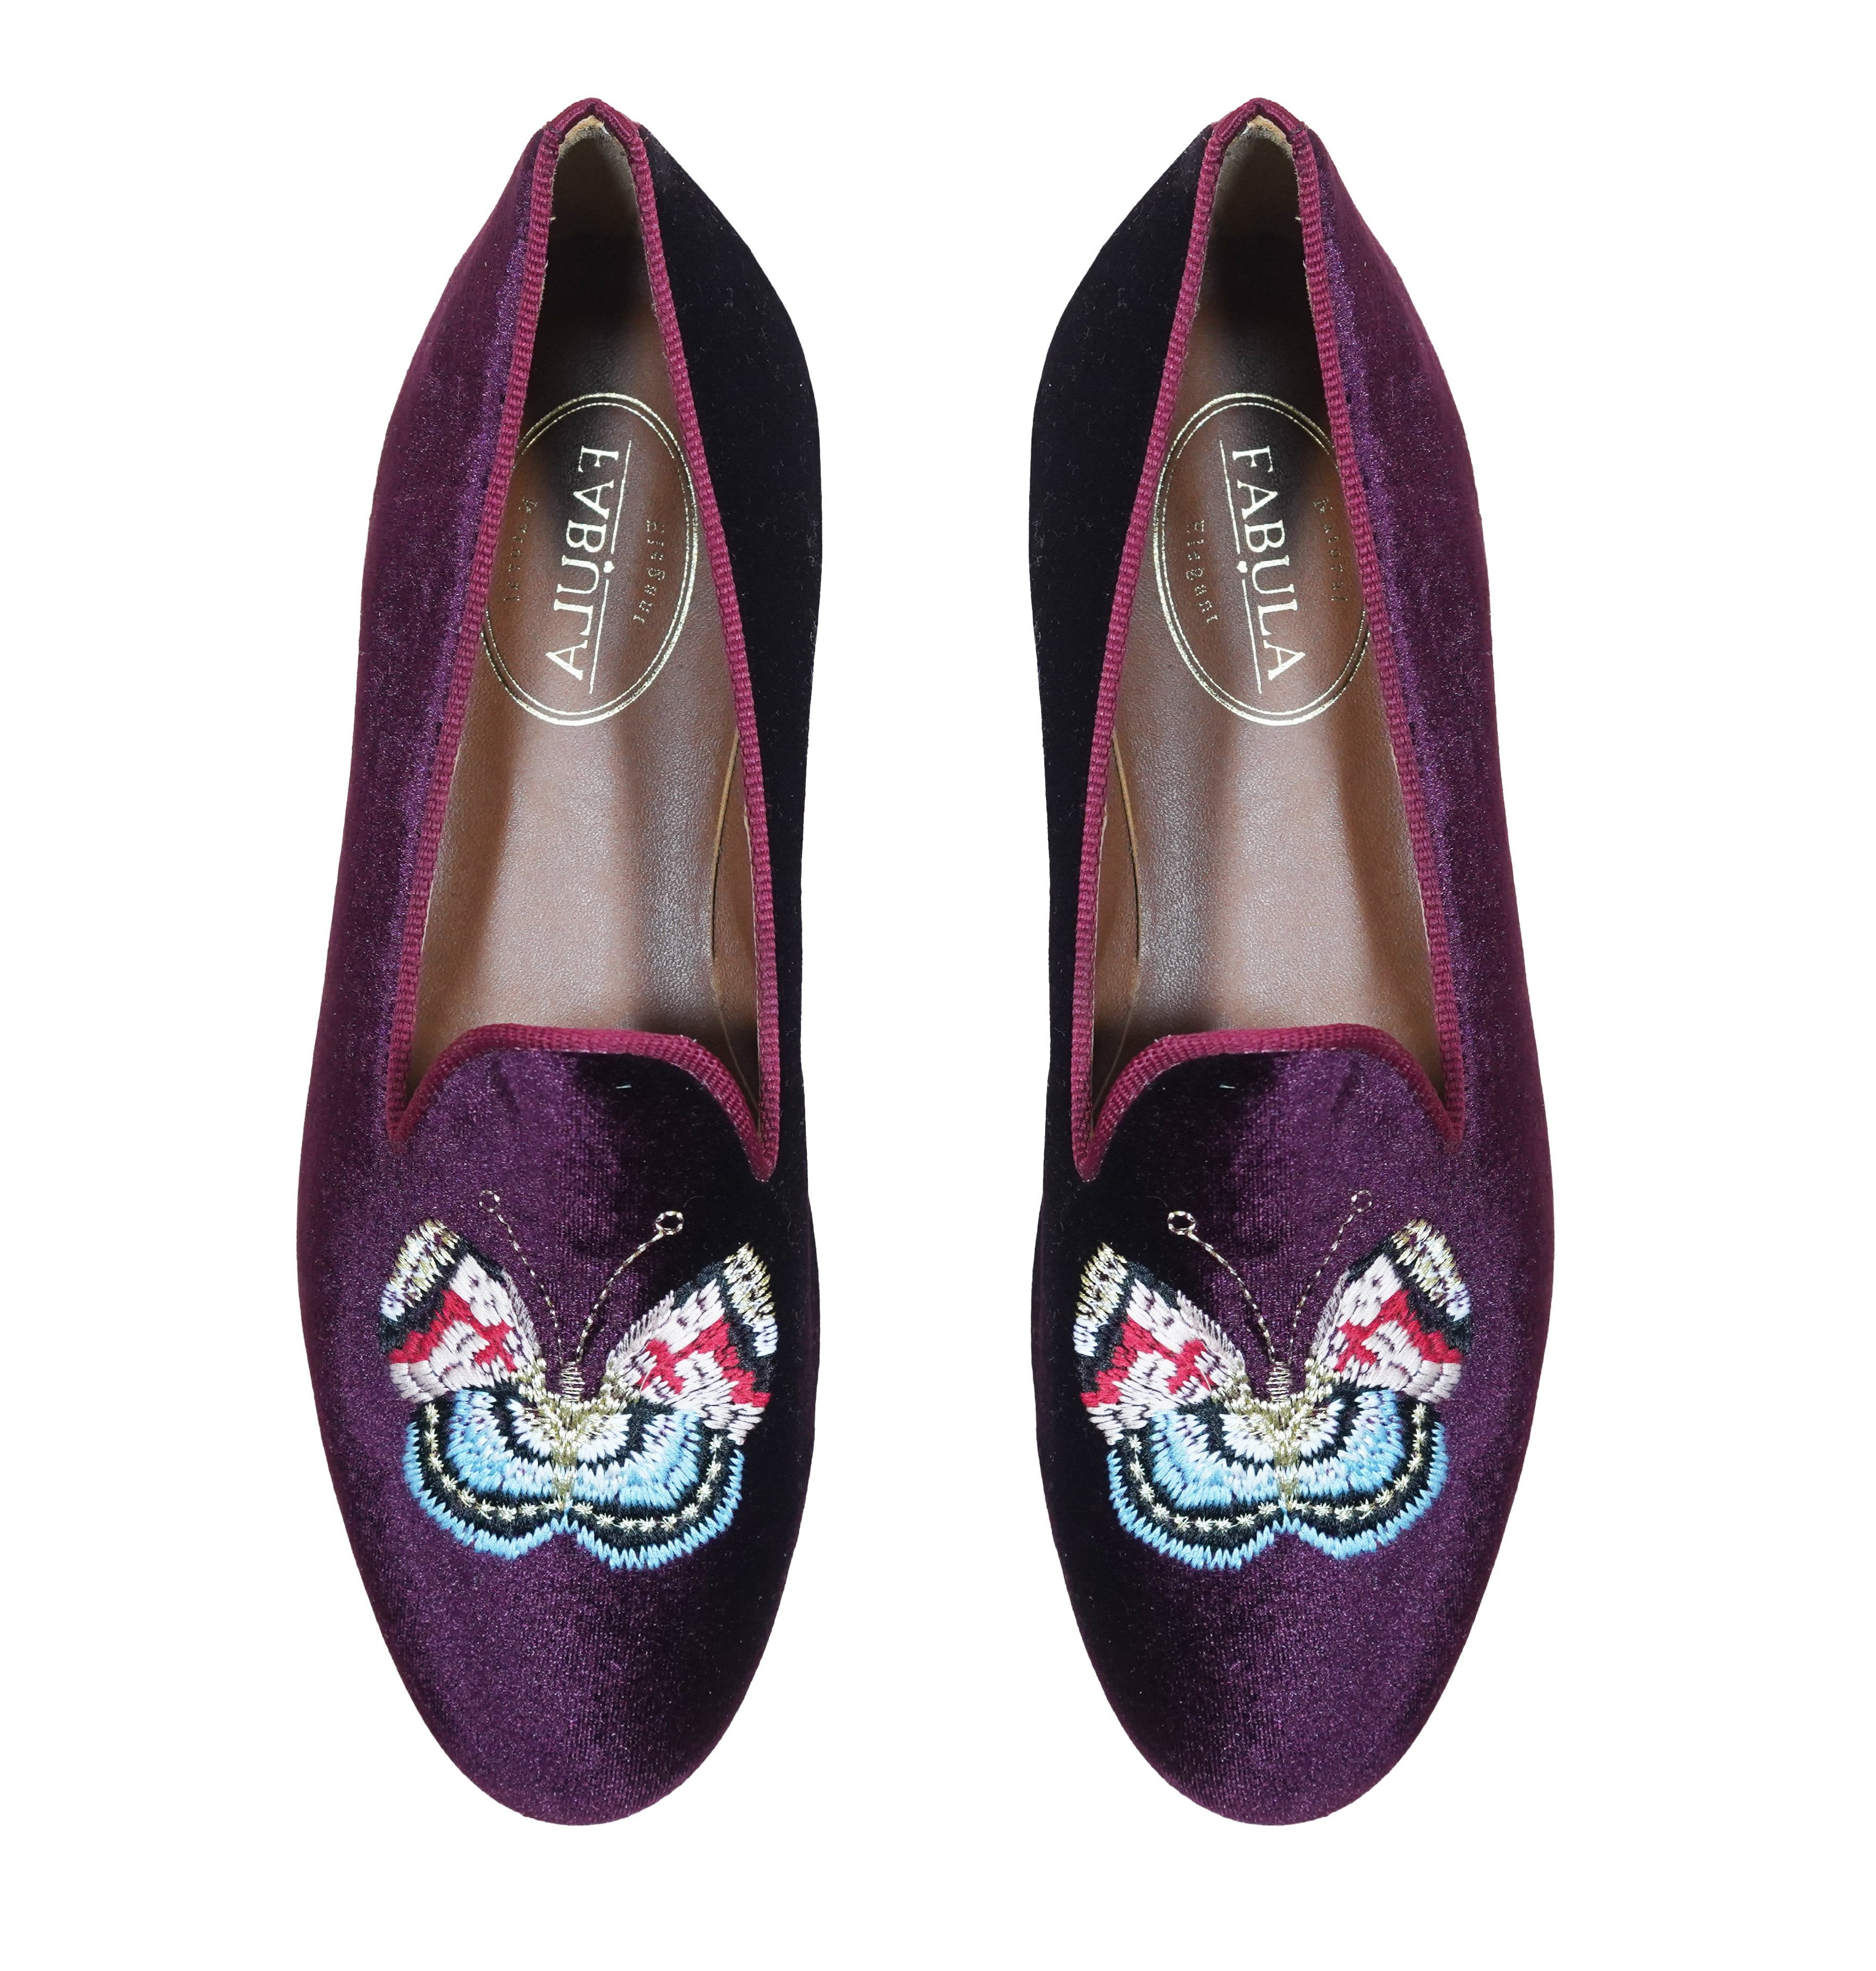 handmade purple slippers with a butterfly embroidery for women